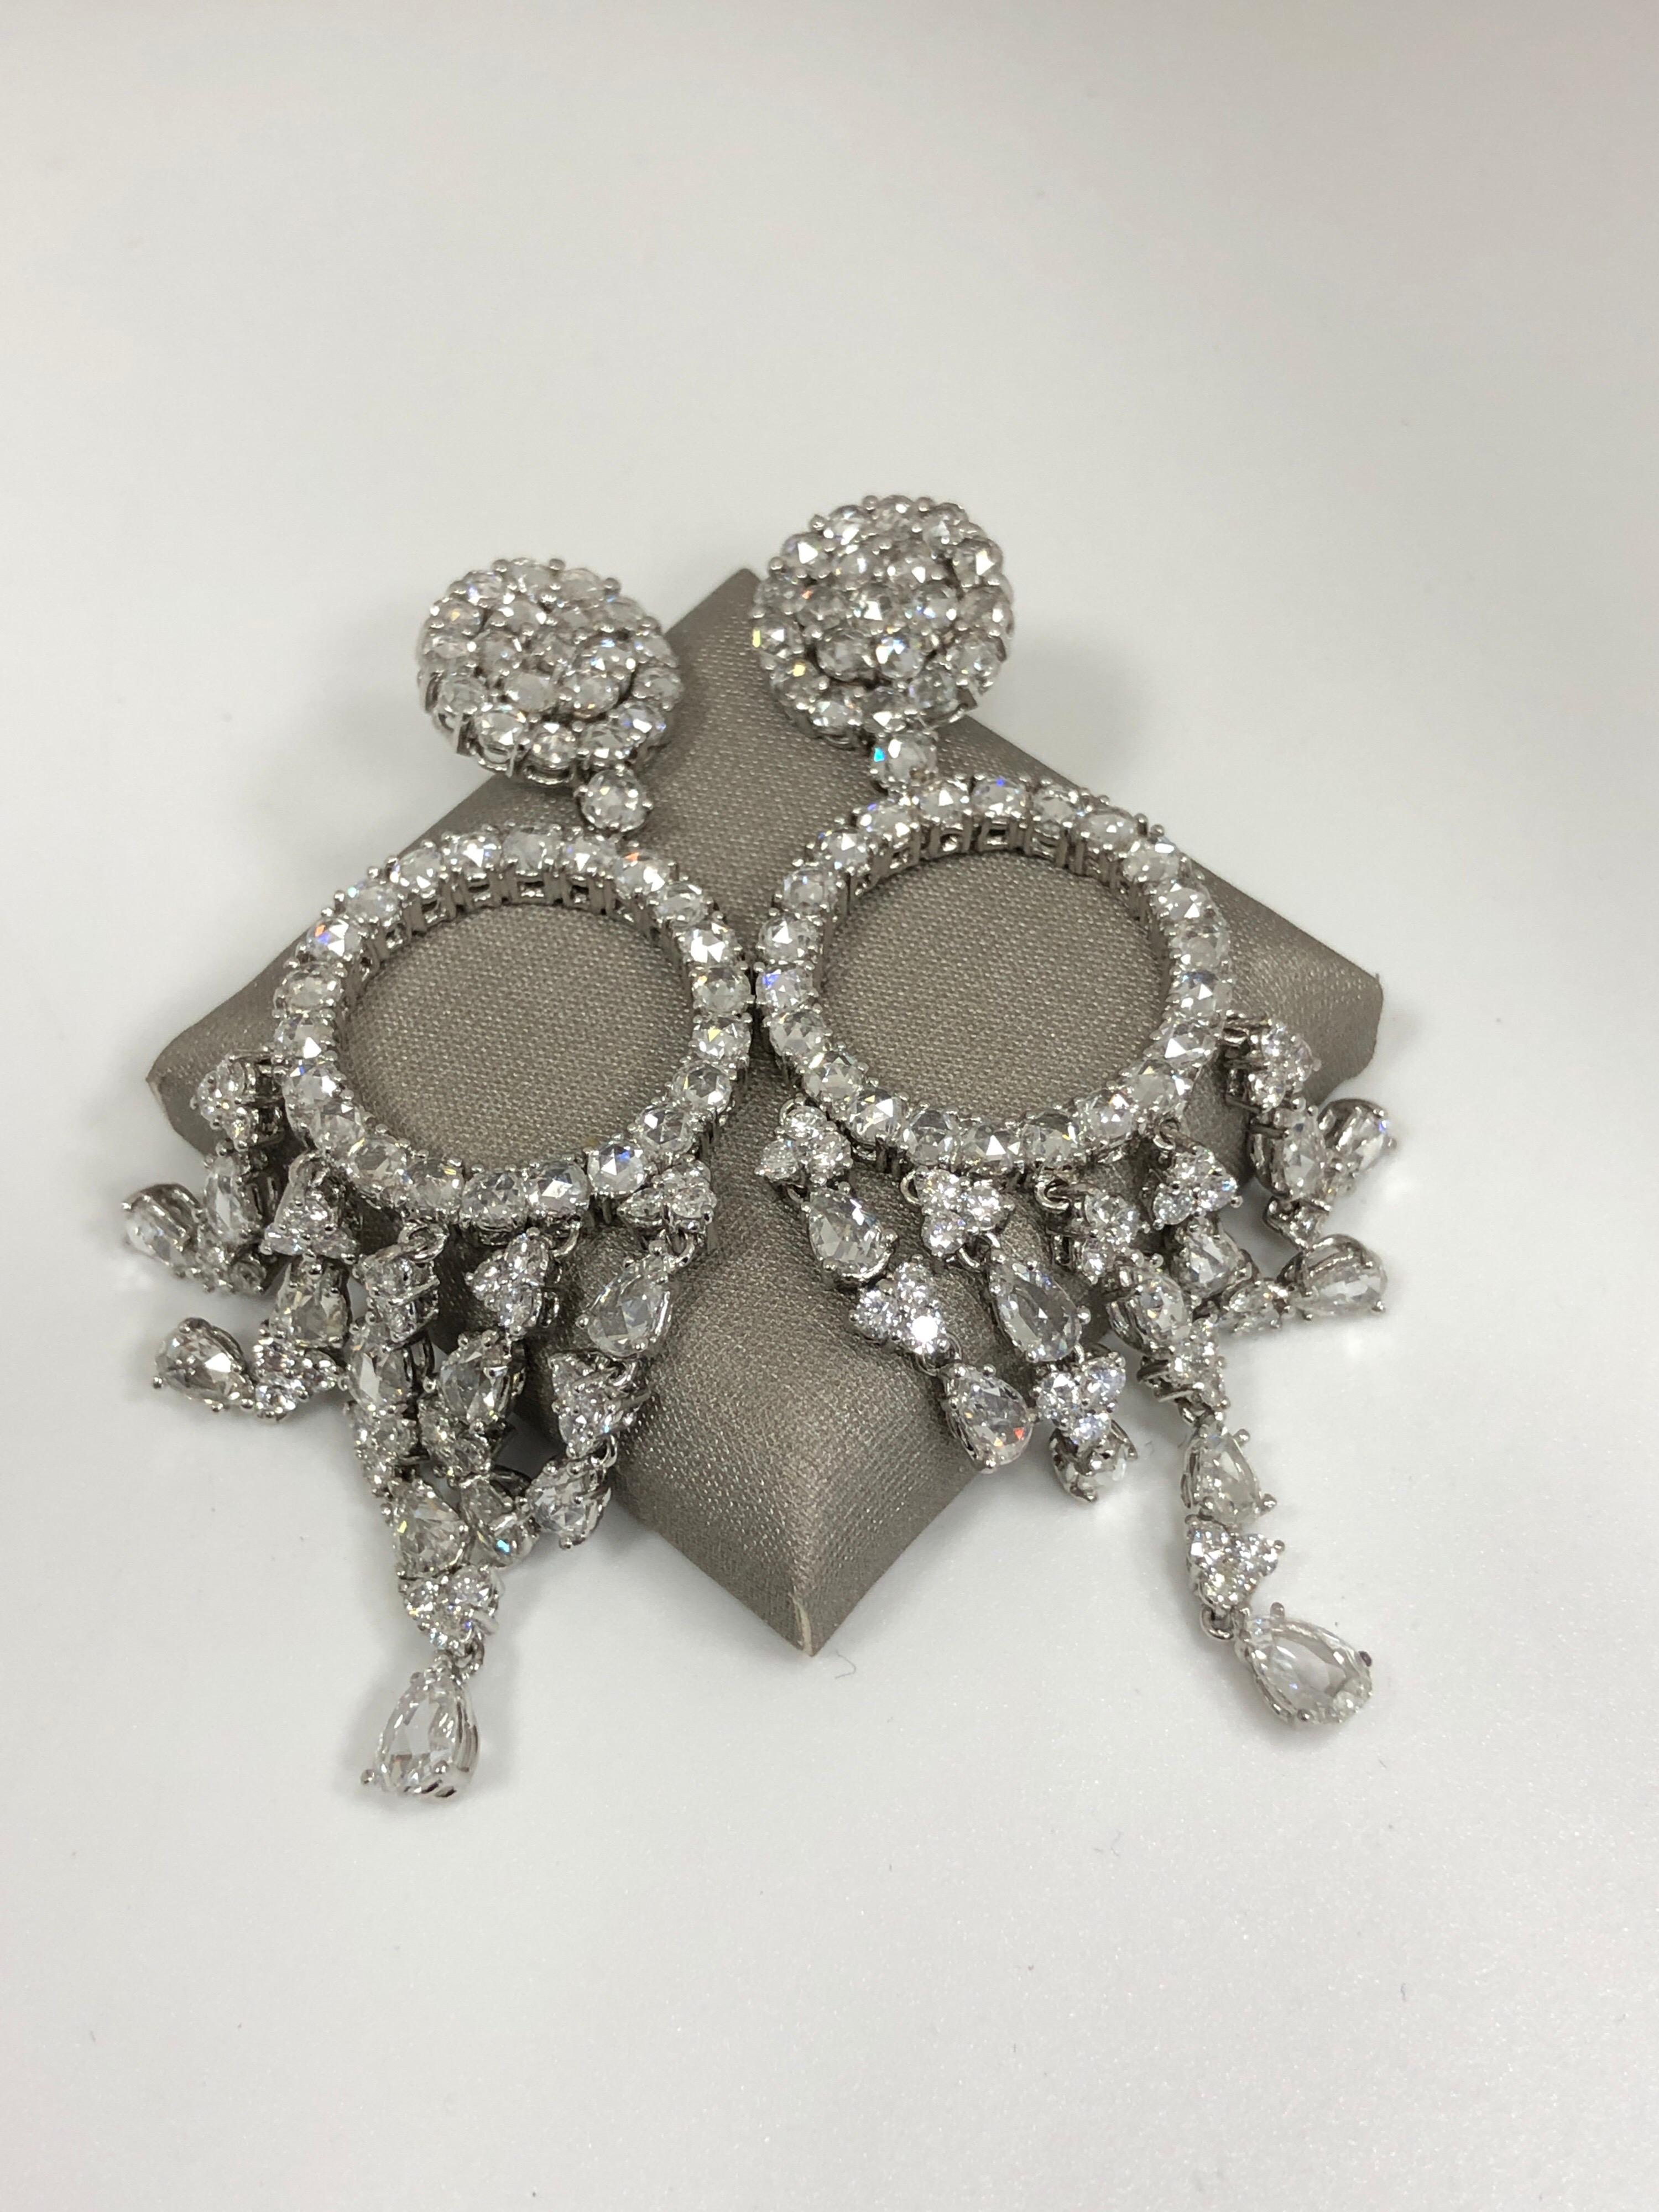 The fabulous chandelier earrings are mounted with rose cut and full cut round and pear shaped diamonds. Measuring 2.75 inches long by 1 inch wide, and with approximately 10 carat total weight of diamonds these fabulous earrings make quite the